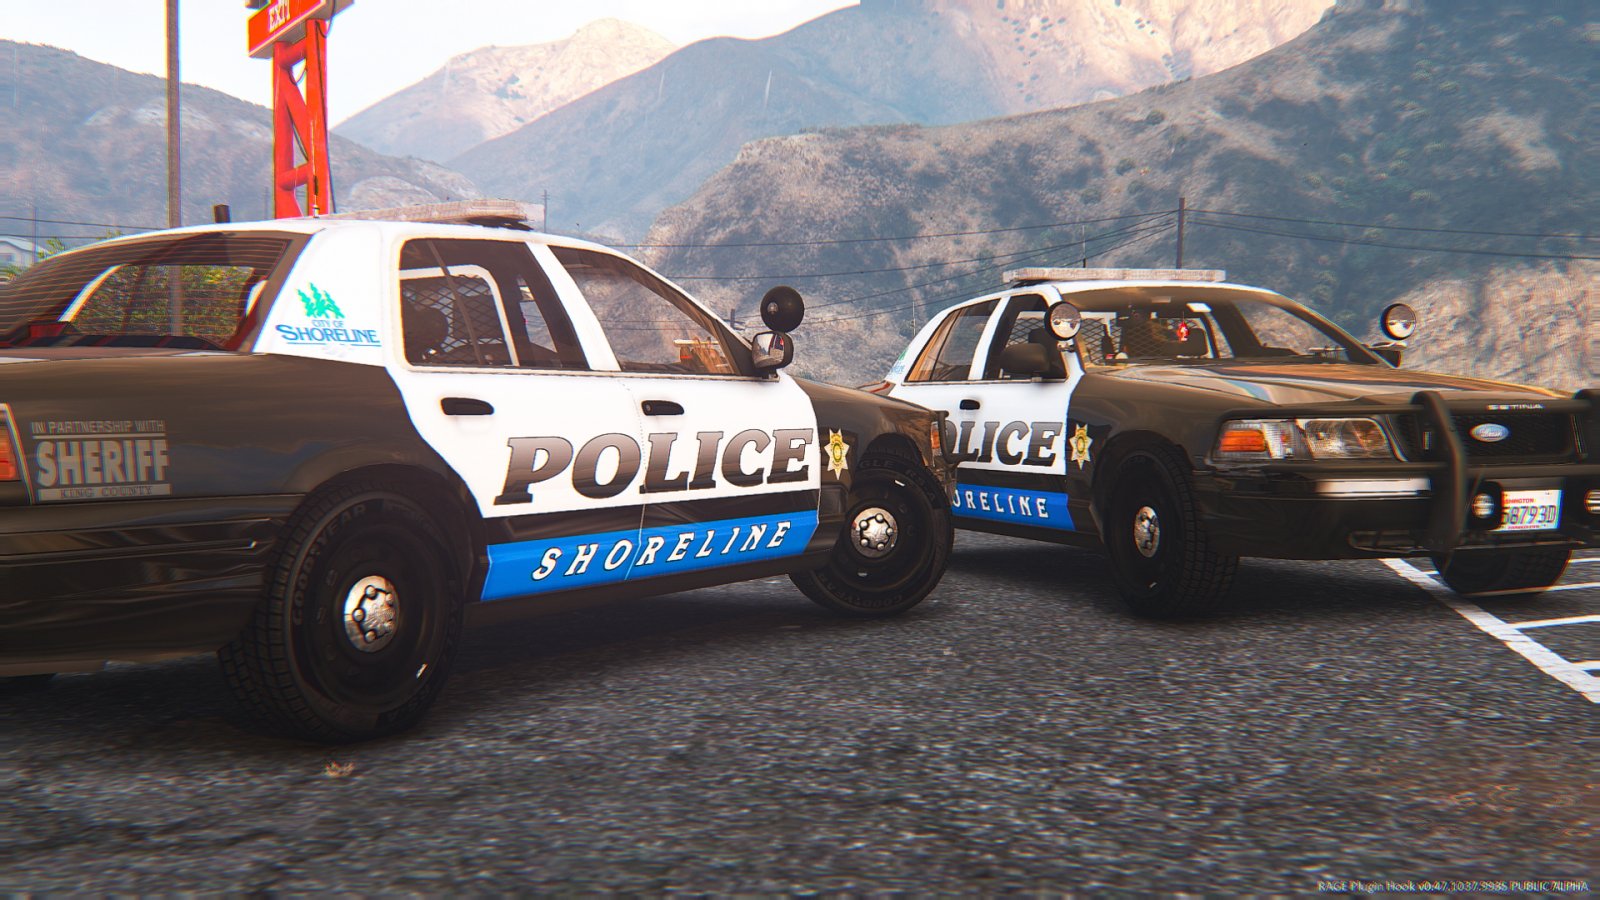 Two Shoreline Police cars